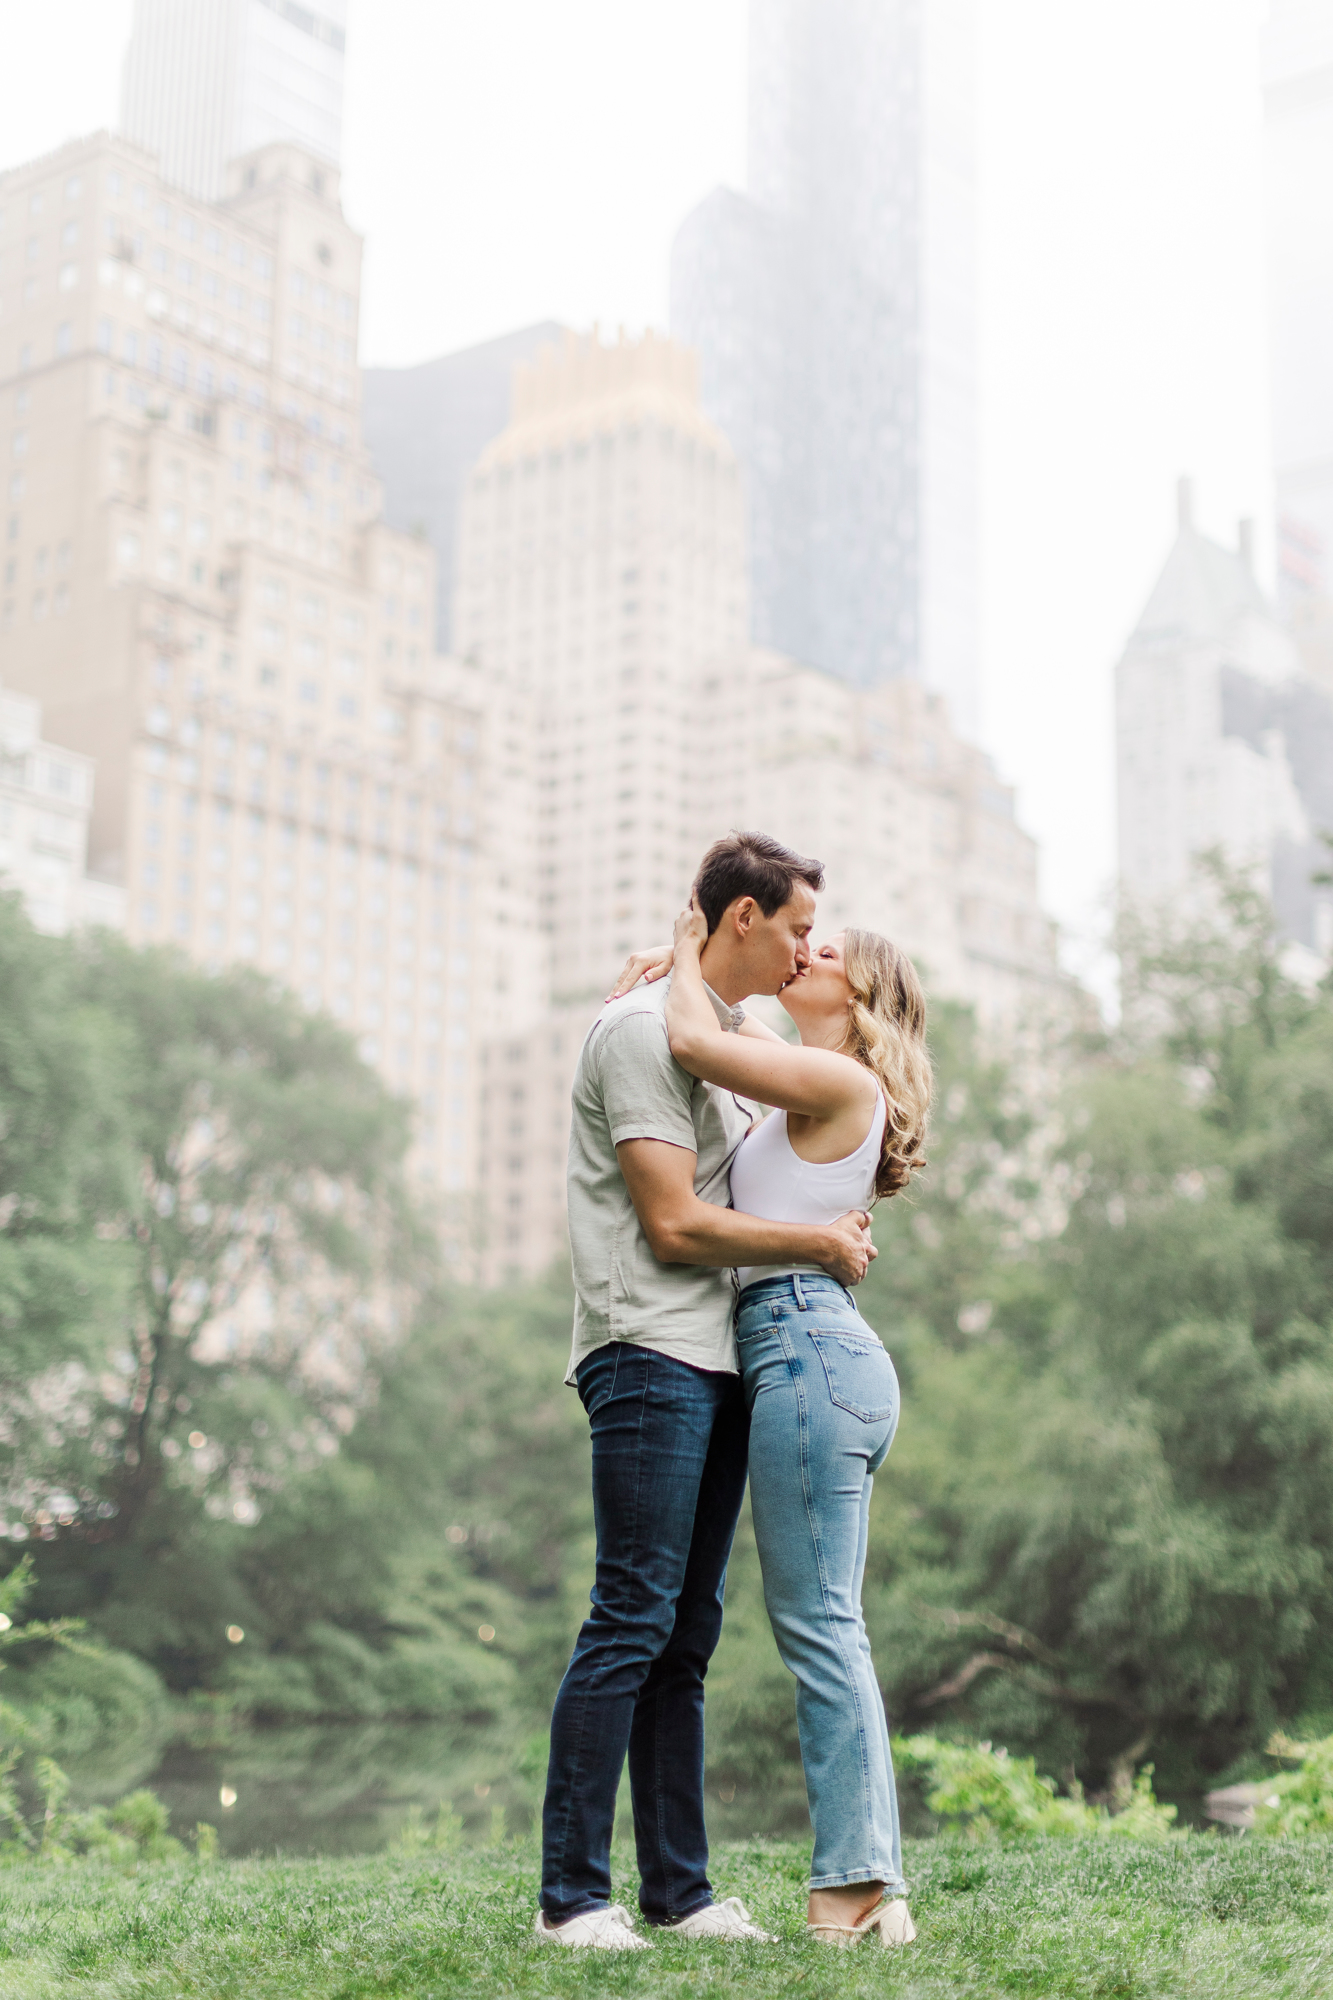 Magical Engagement Session in Central Park